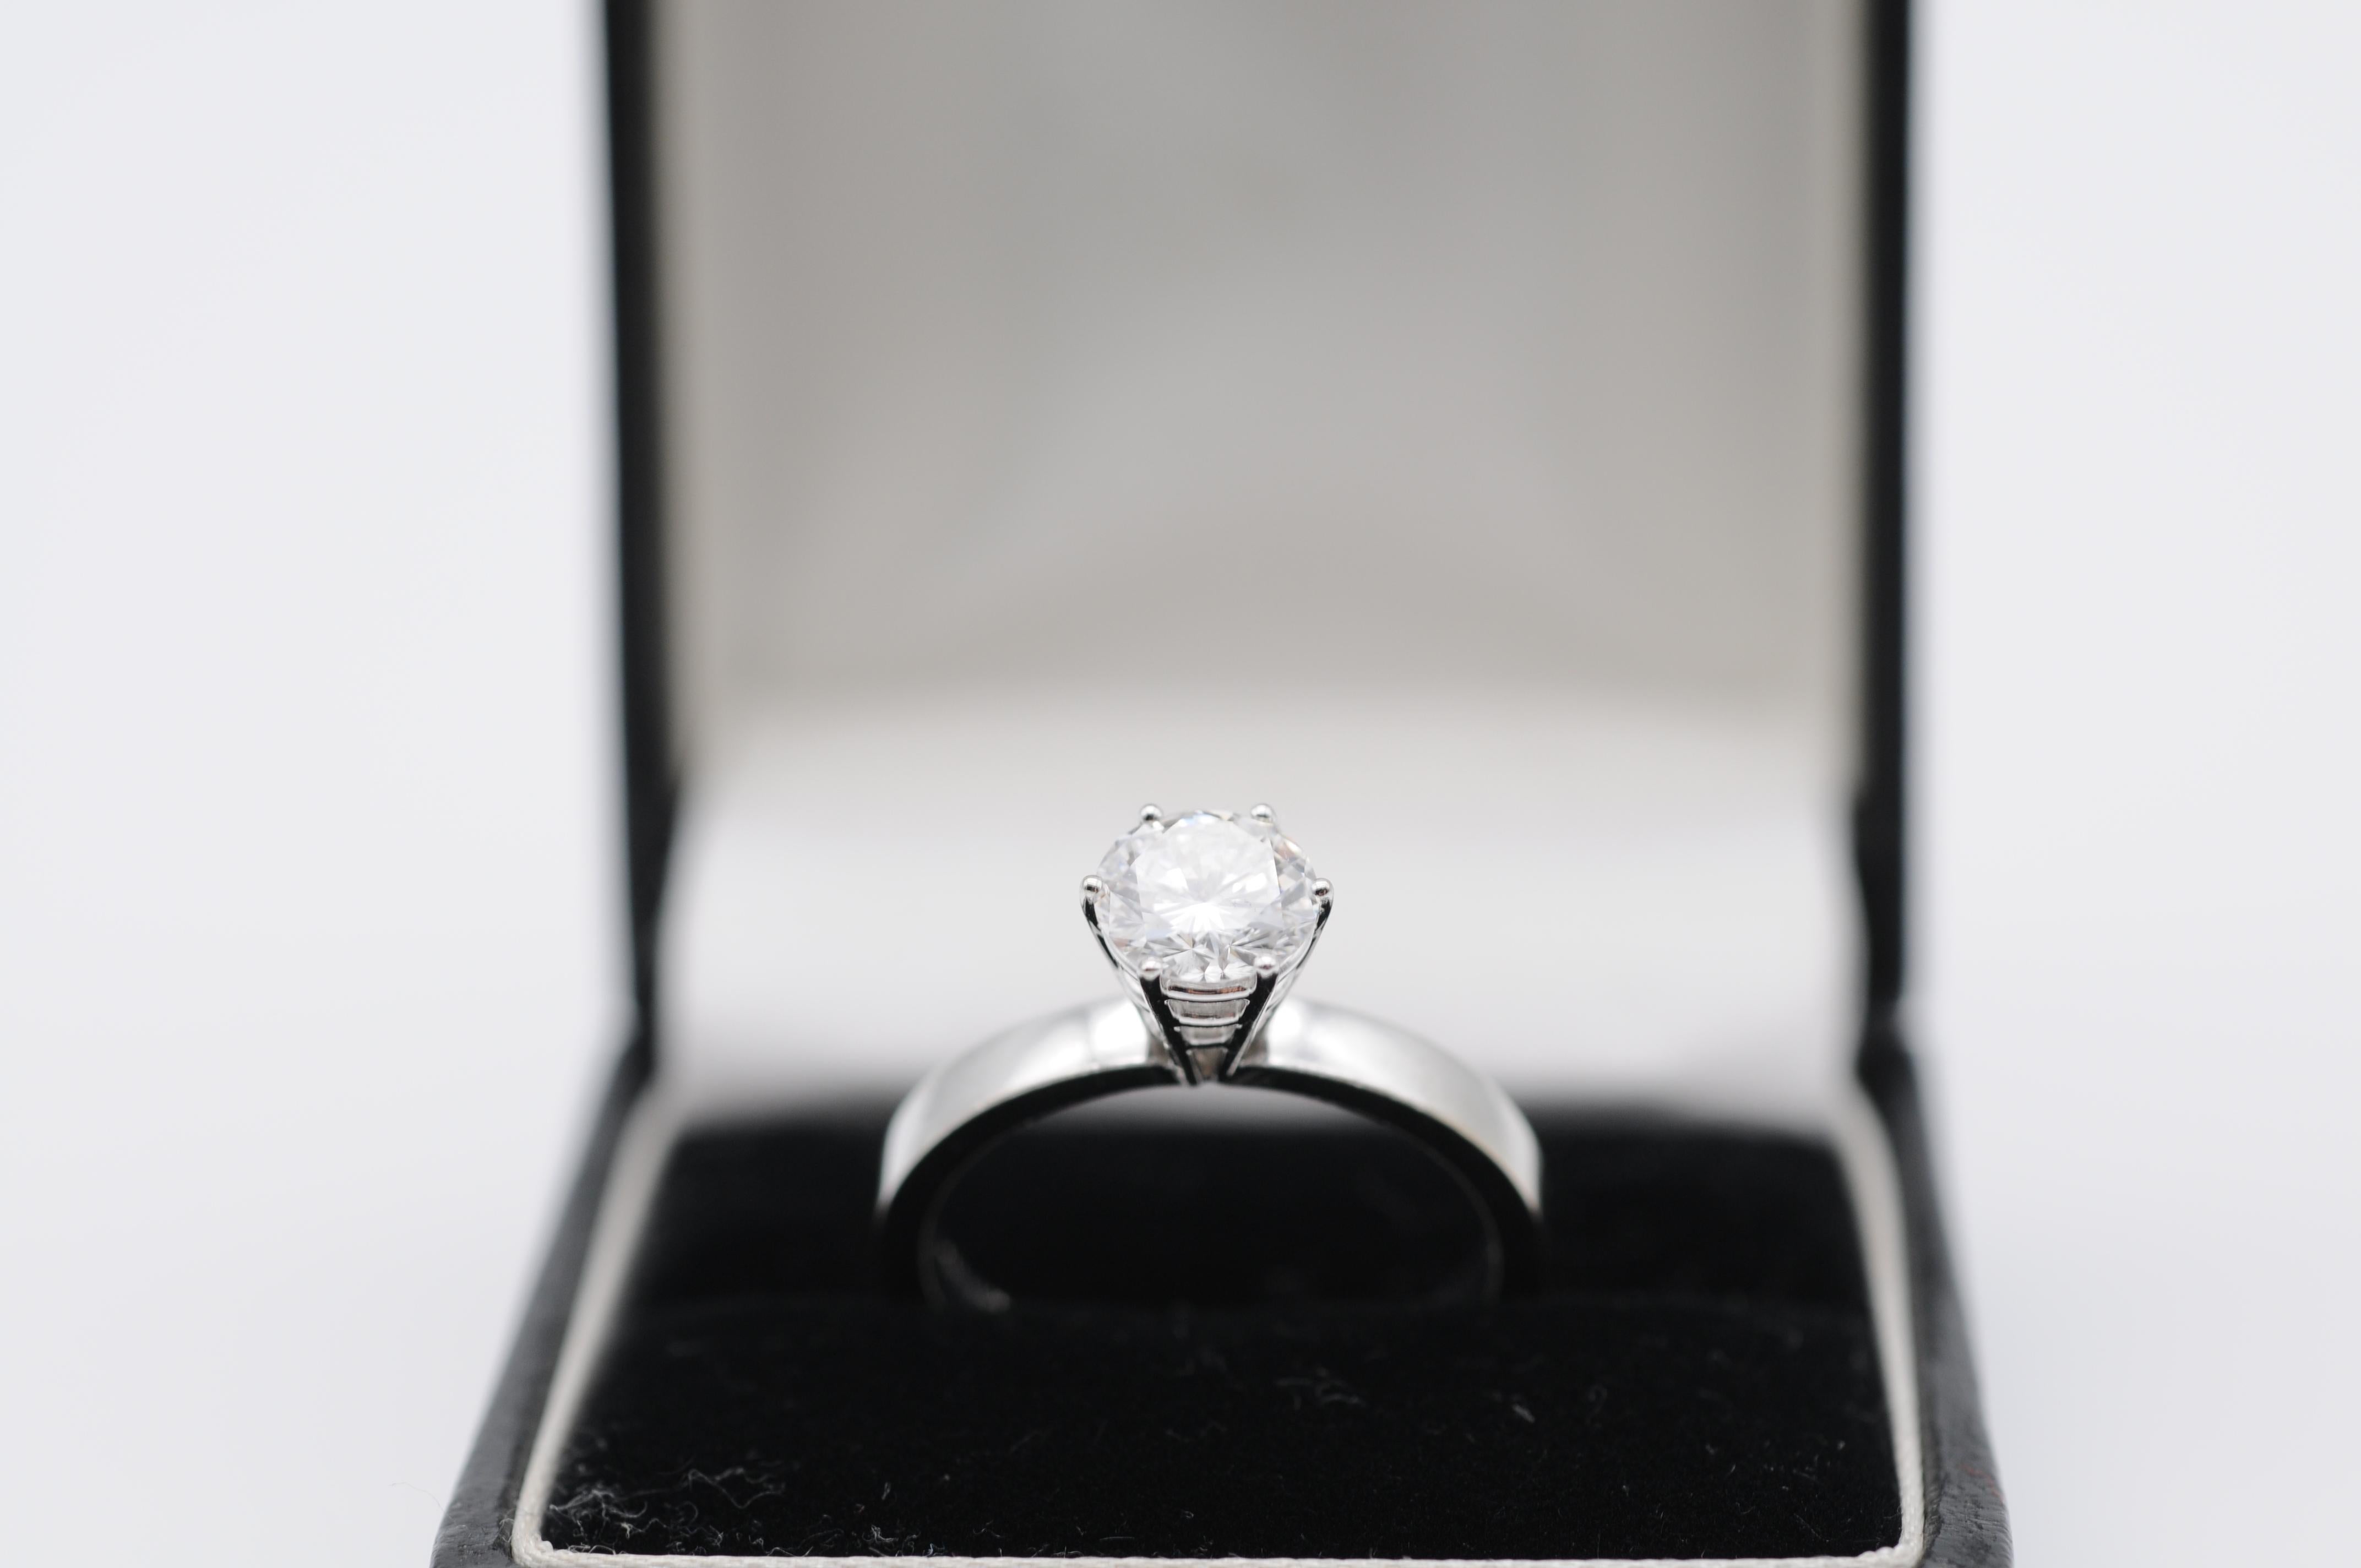 Diamond Details:

Clarity: VVS1 (Very Very Slightly Included, with minute inclusions only visible under 10x magnification)
Color: G (Near Colorless)
Carat: 1.05
Cut: Good
Shape: Brilliant Round
Additional Characteristics:

Fluorescence: None
Girdle: